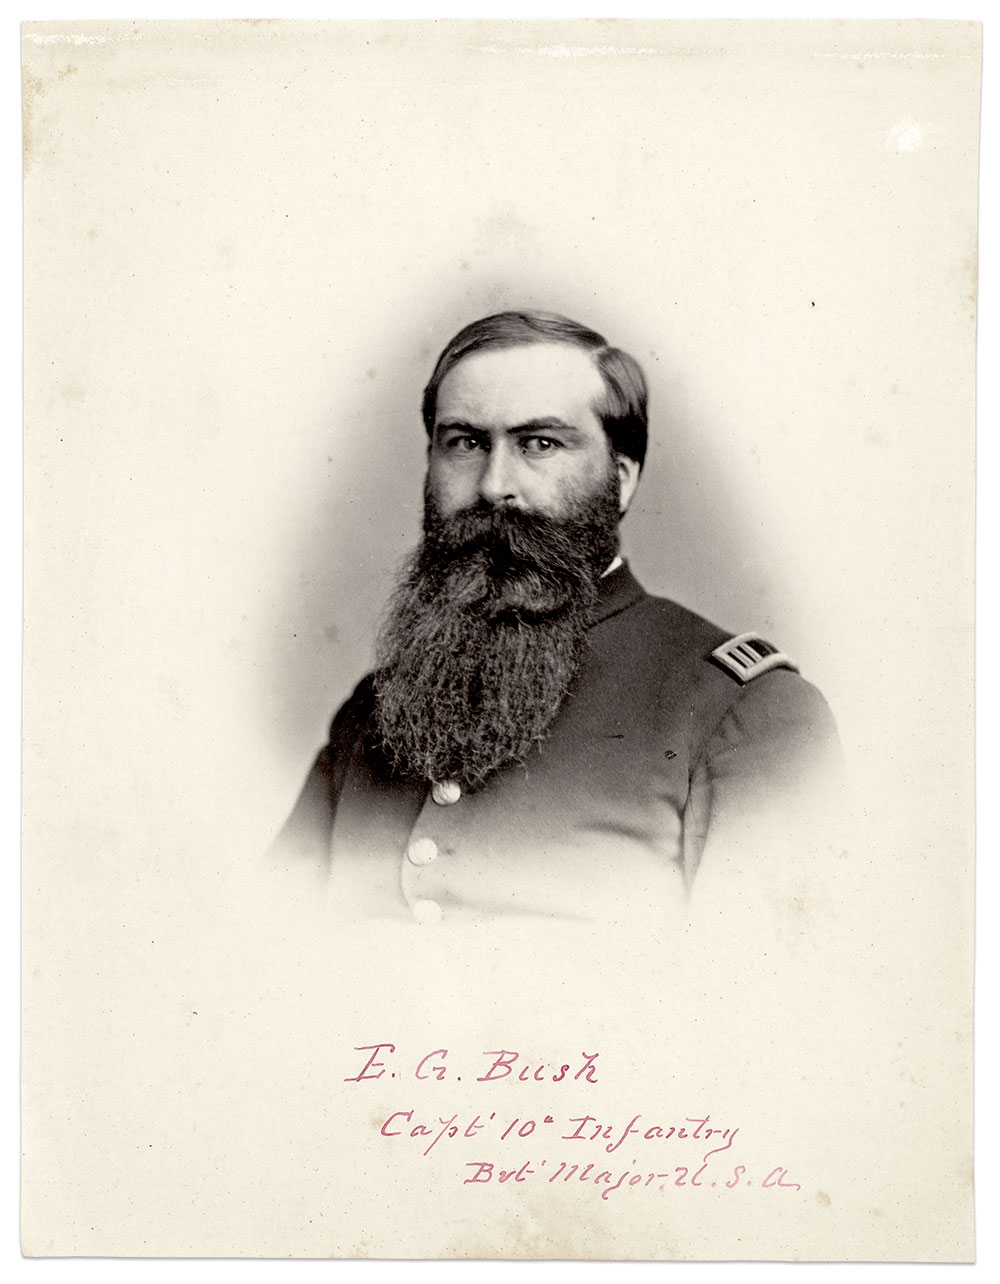 Capt. Edward G. Bush assisted Fisher. Albumen print by an unidentified photographer.